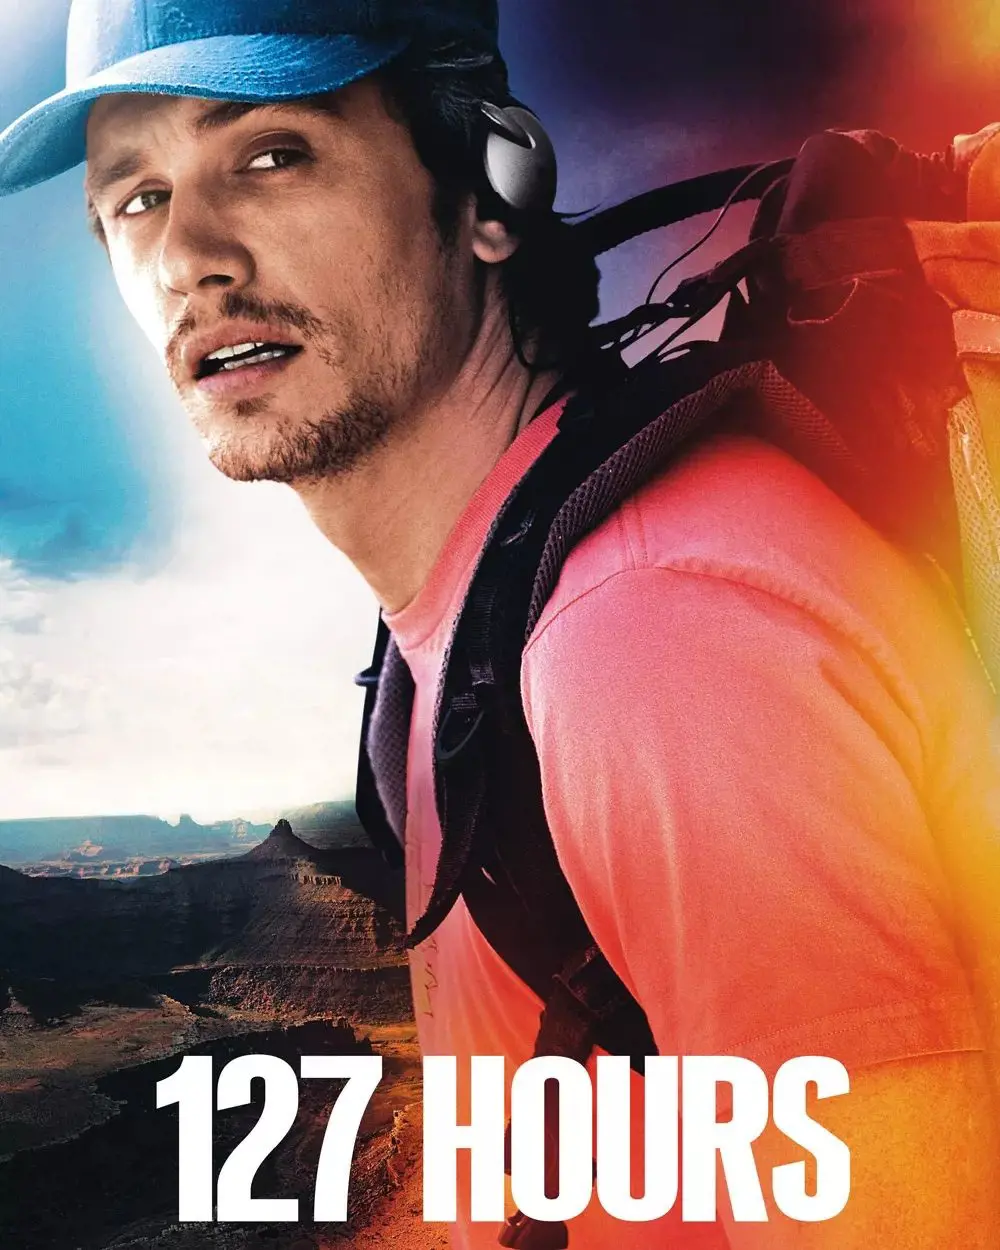 A man stuck on for 127 hours in a deserted place. 